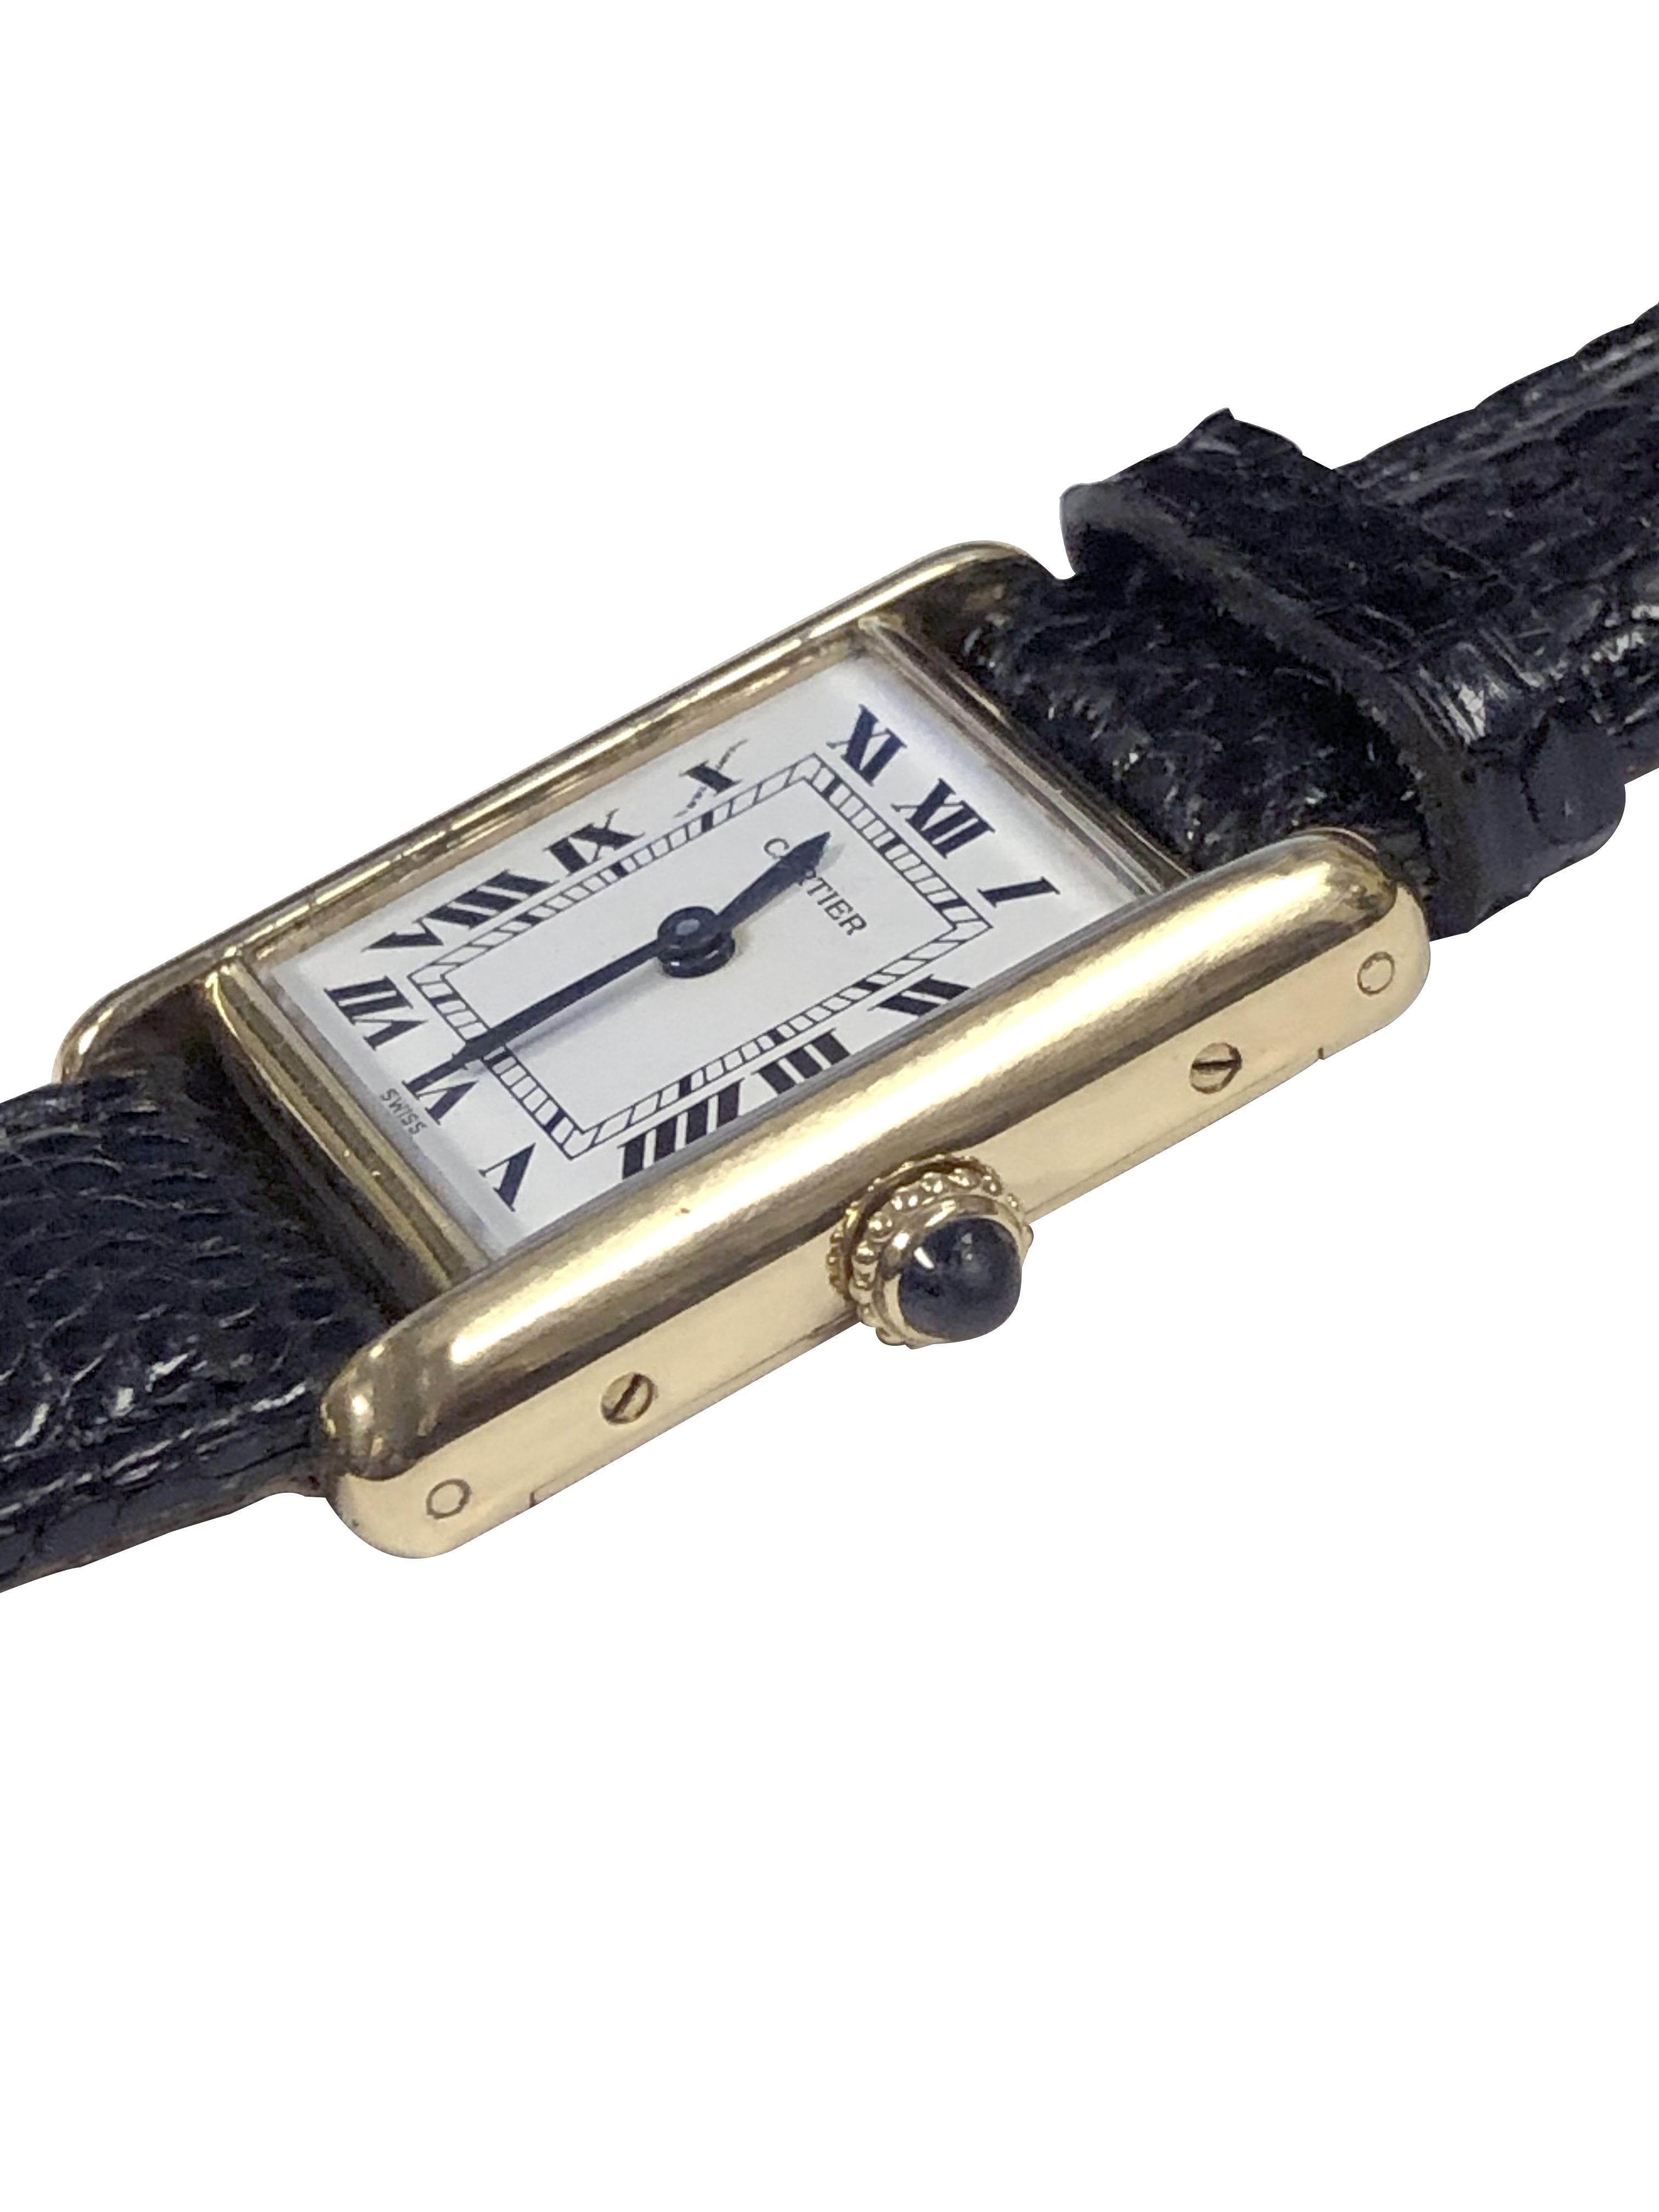 Circa 1990 Cartier Paris Ladies Classic Tank Wrist Watch, 20 X 19 M.M 18K Yellow Gold 2 piece case. Mechanical, manual wind movement, Sapphire crown, White dial with Black Roman Numerals. New Black Lizard Strap. Watch Length 7 1/4 inches. Comes in a